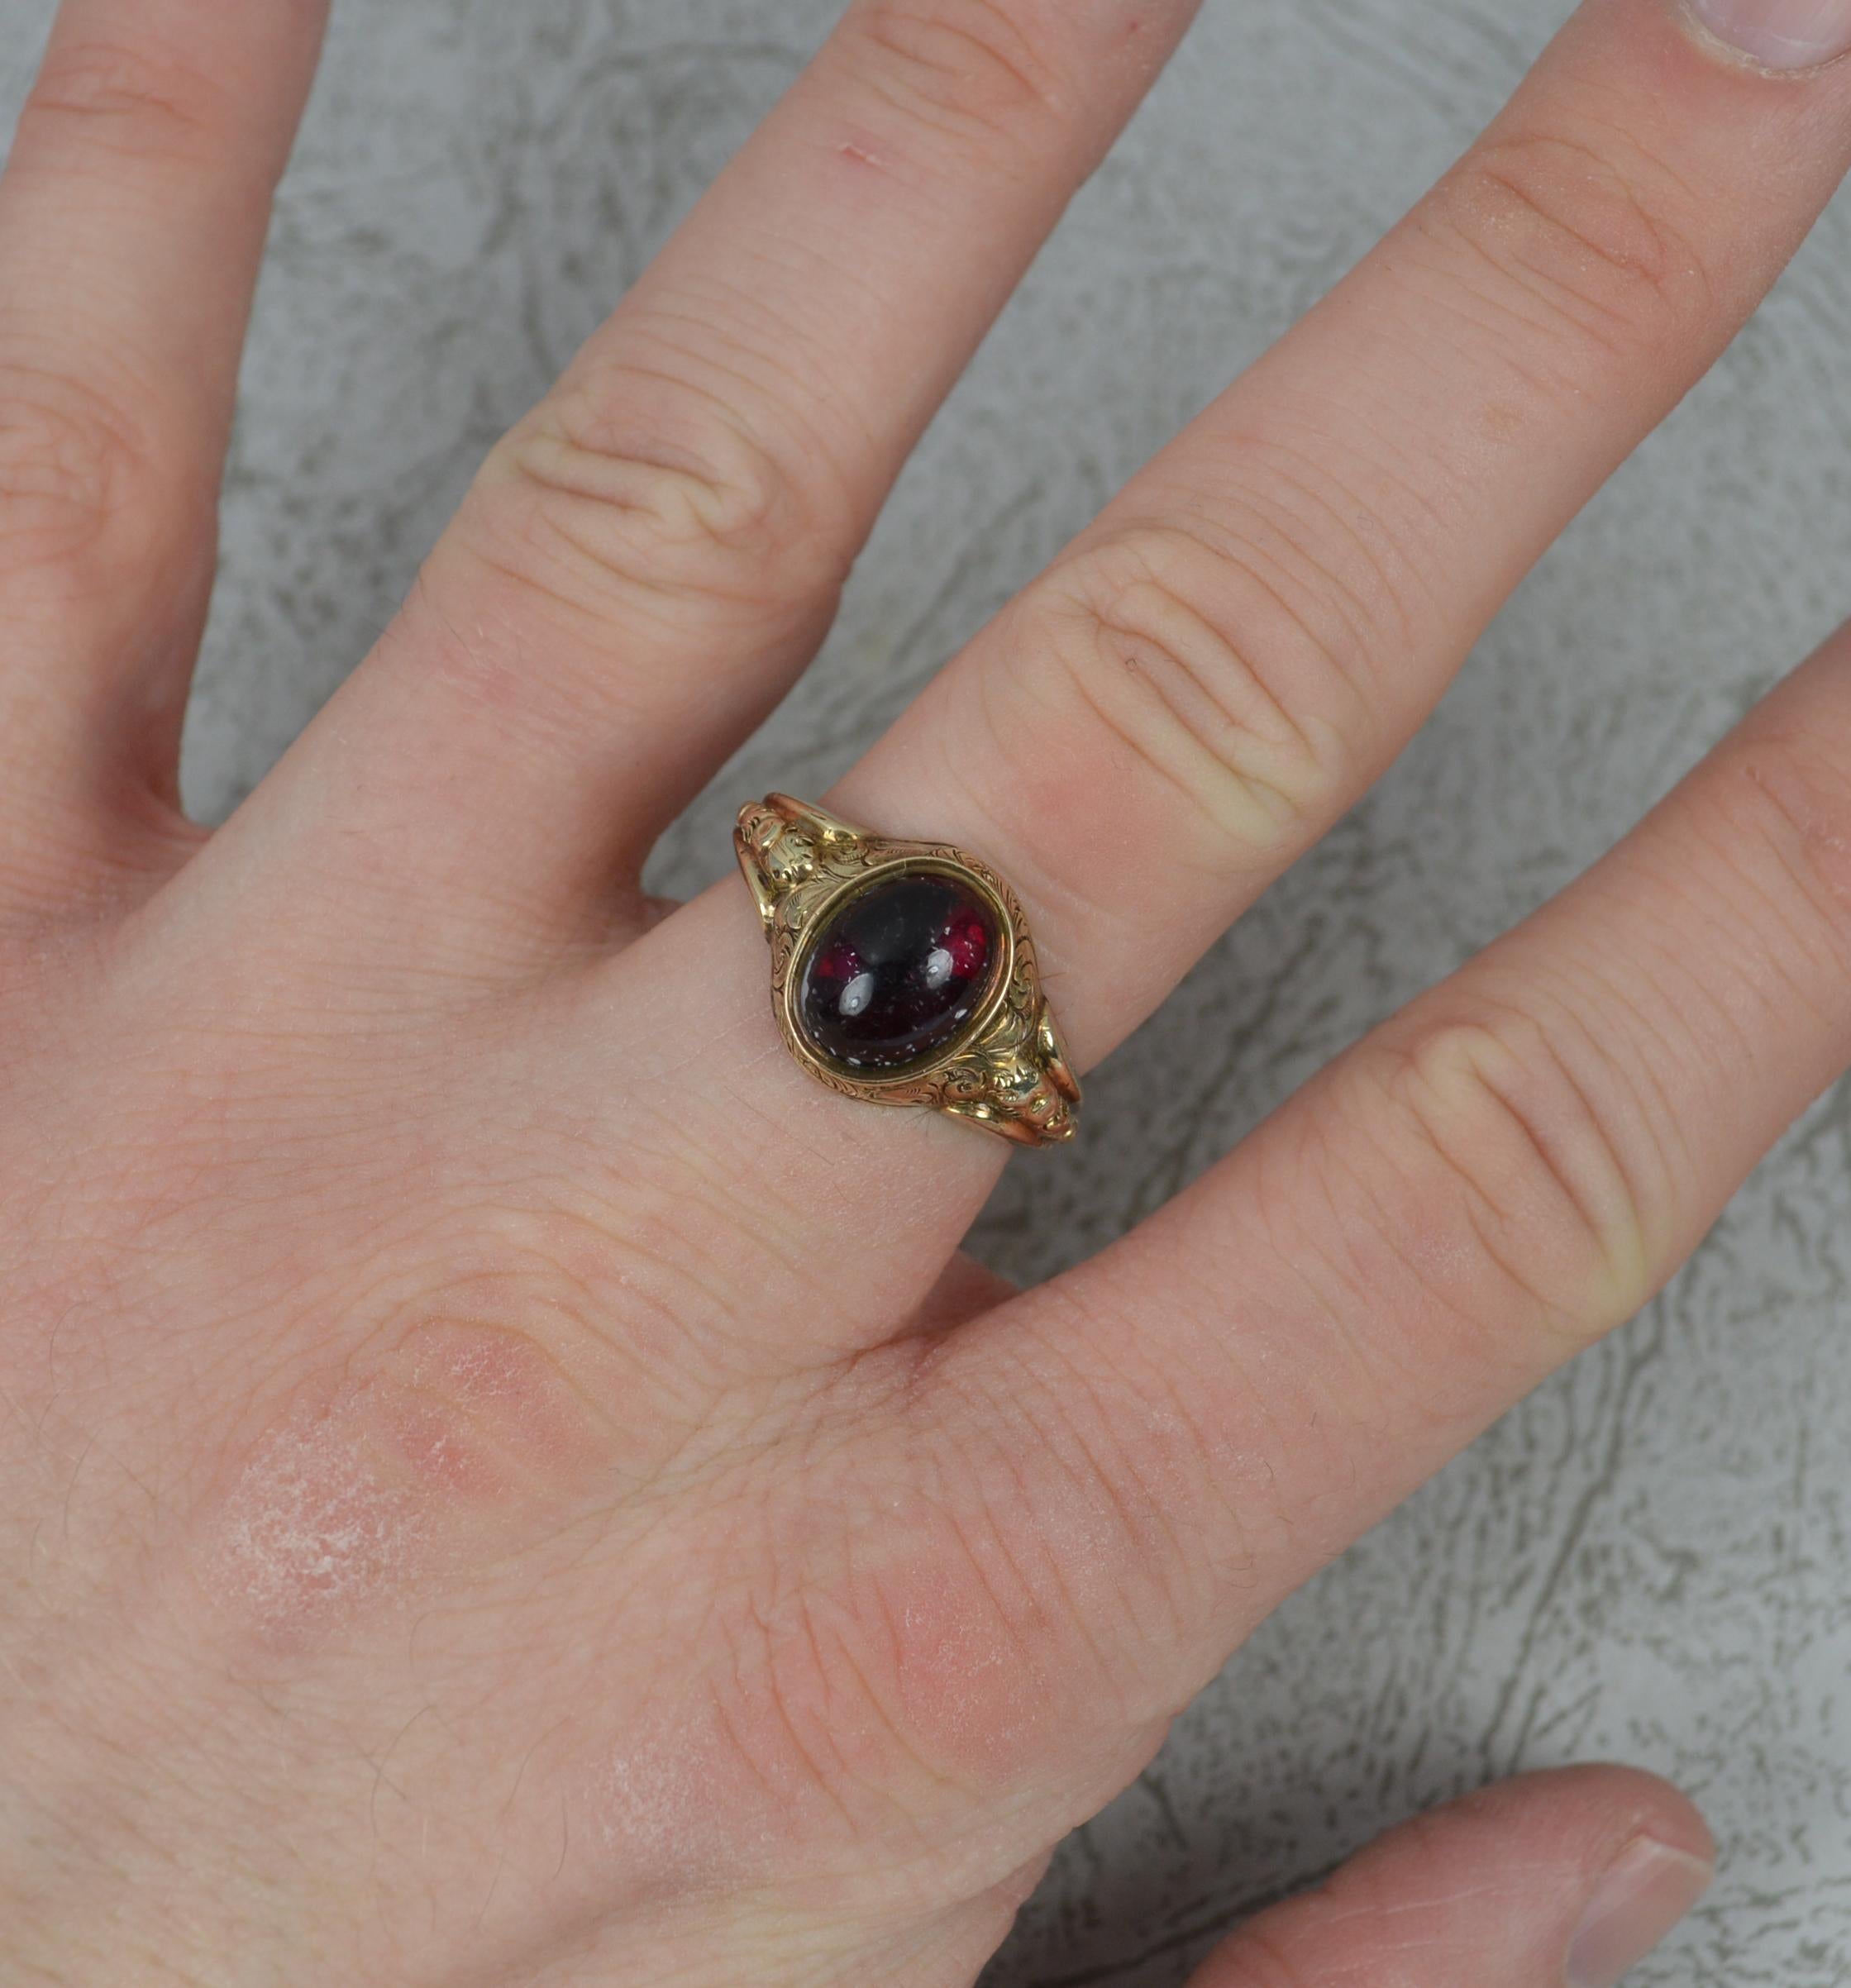 A fine mid Victorian era ring.
Designed with an oval shaped garnet cabochon to centre, 7mm x 10mm approx.
Set into a hollow 9 carat yellow gold shank with fine floral engraving surrounding the head and shoulders.

CONDITION ; Very Good for age. Well